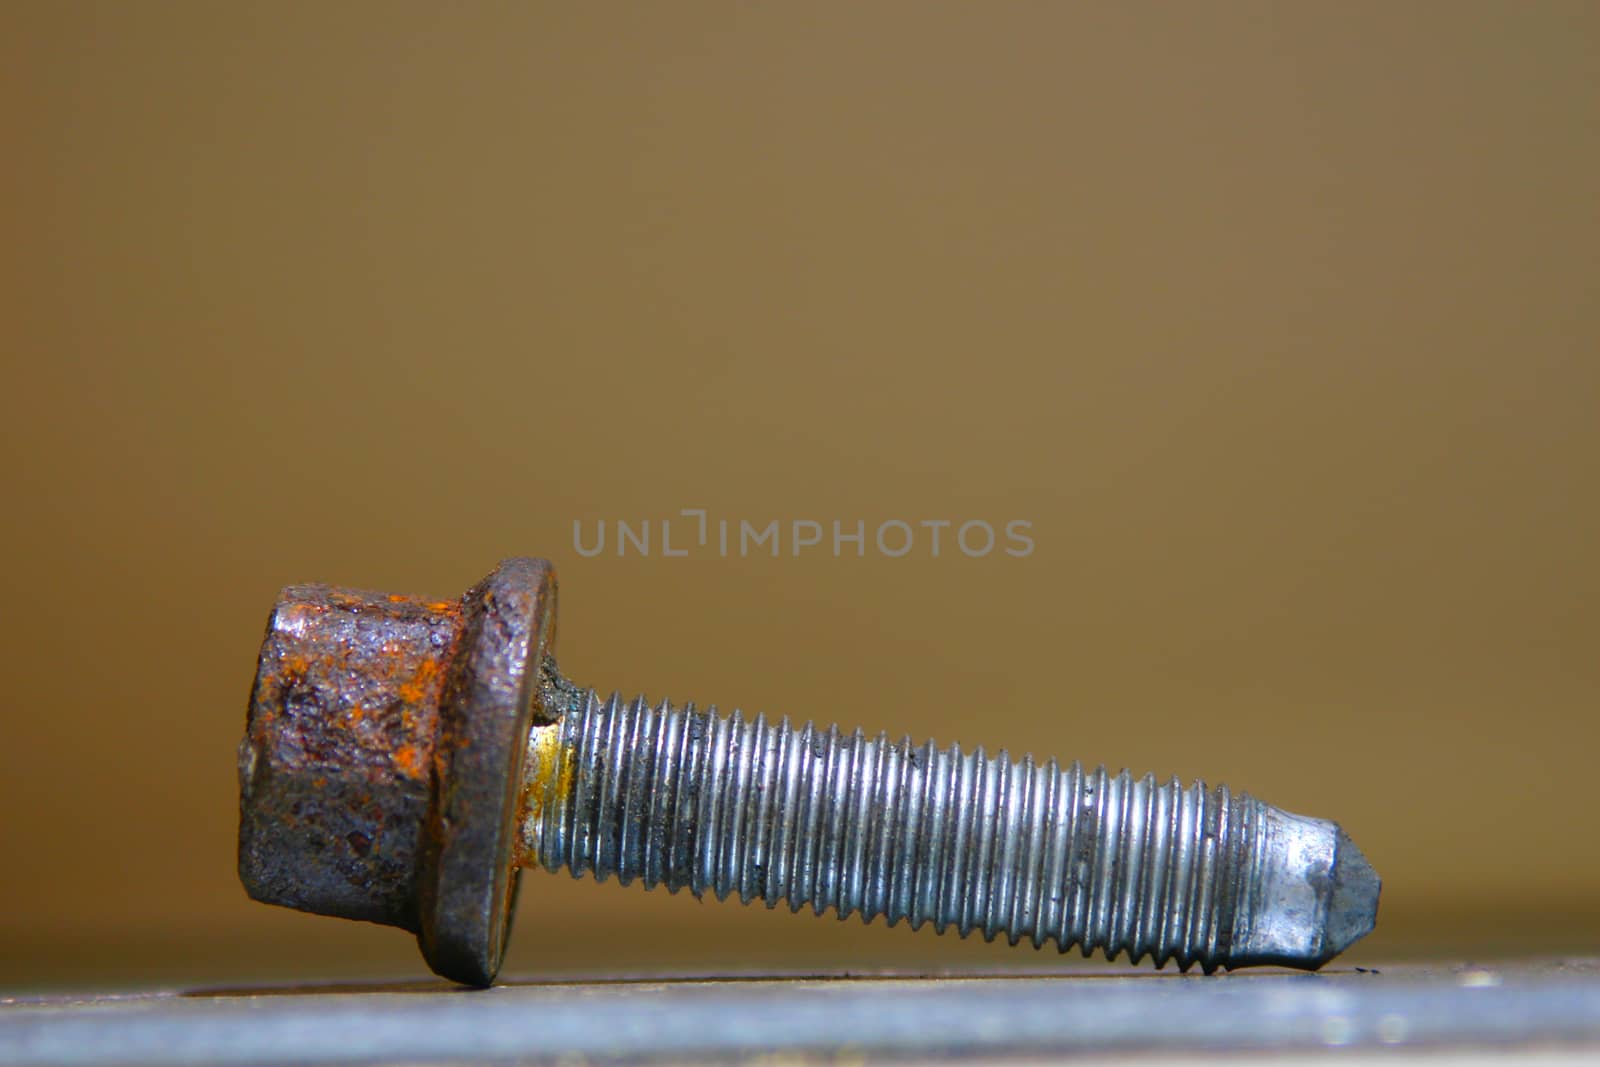 Close photo of an old rusty threaded bolt on the table. Light brown blurred background.